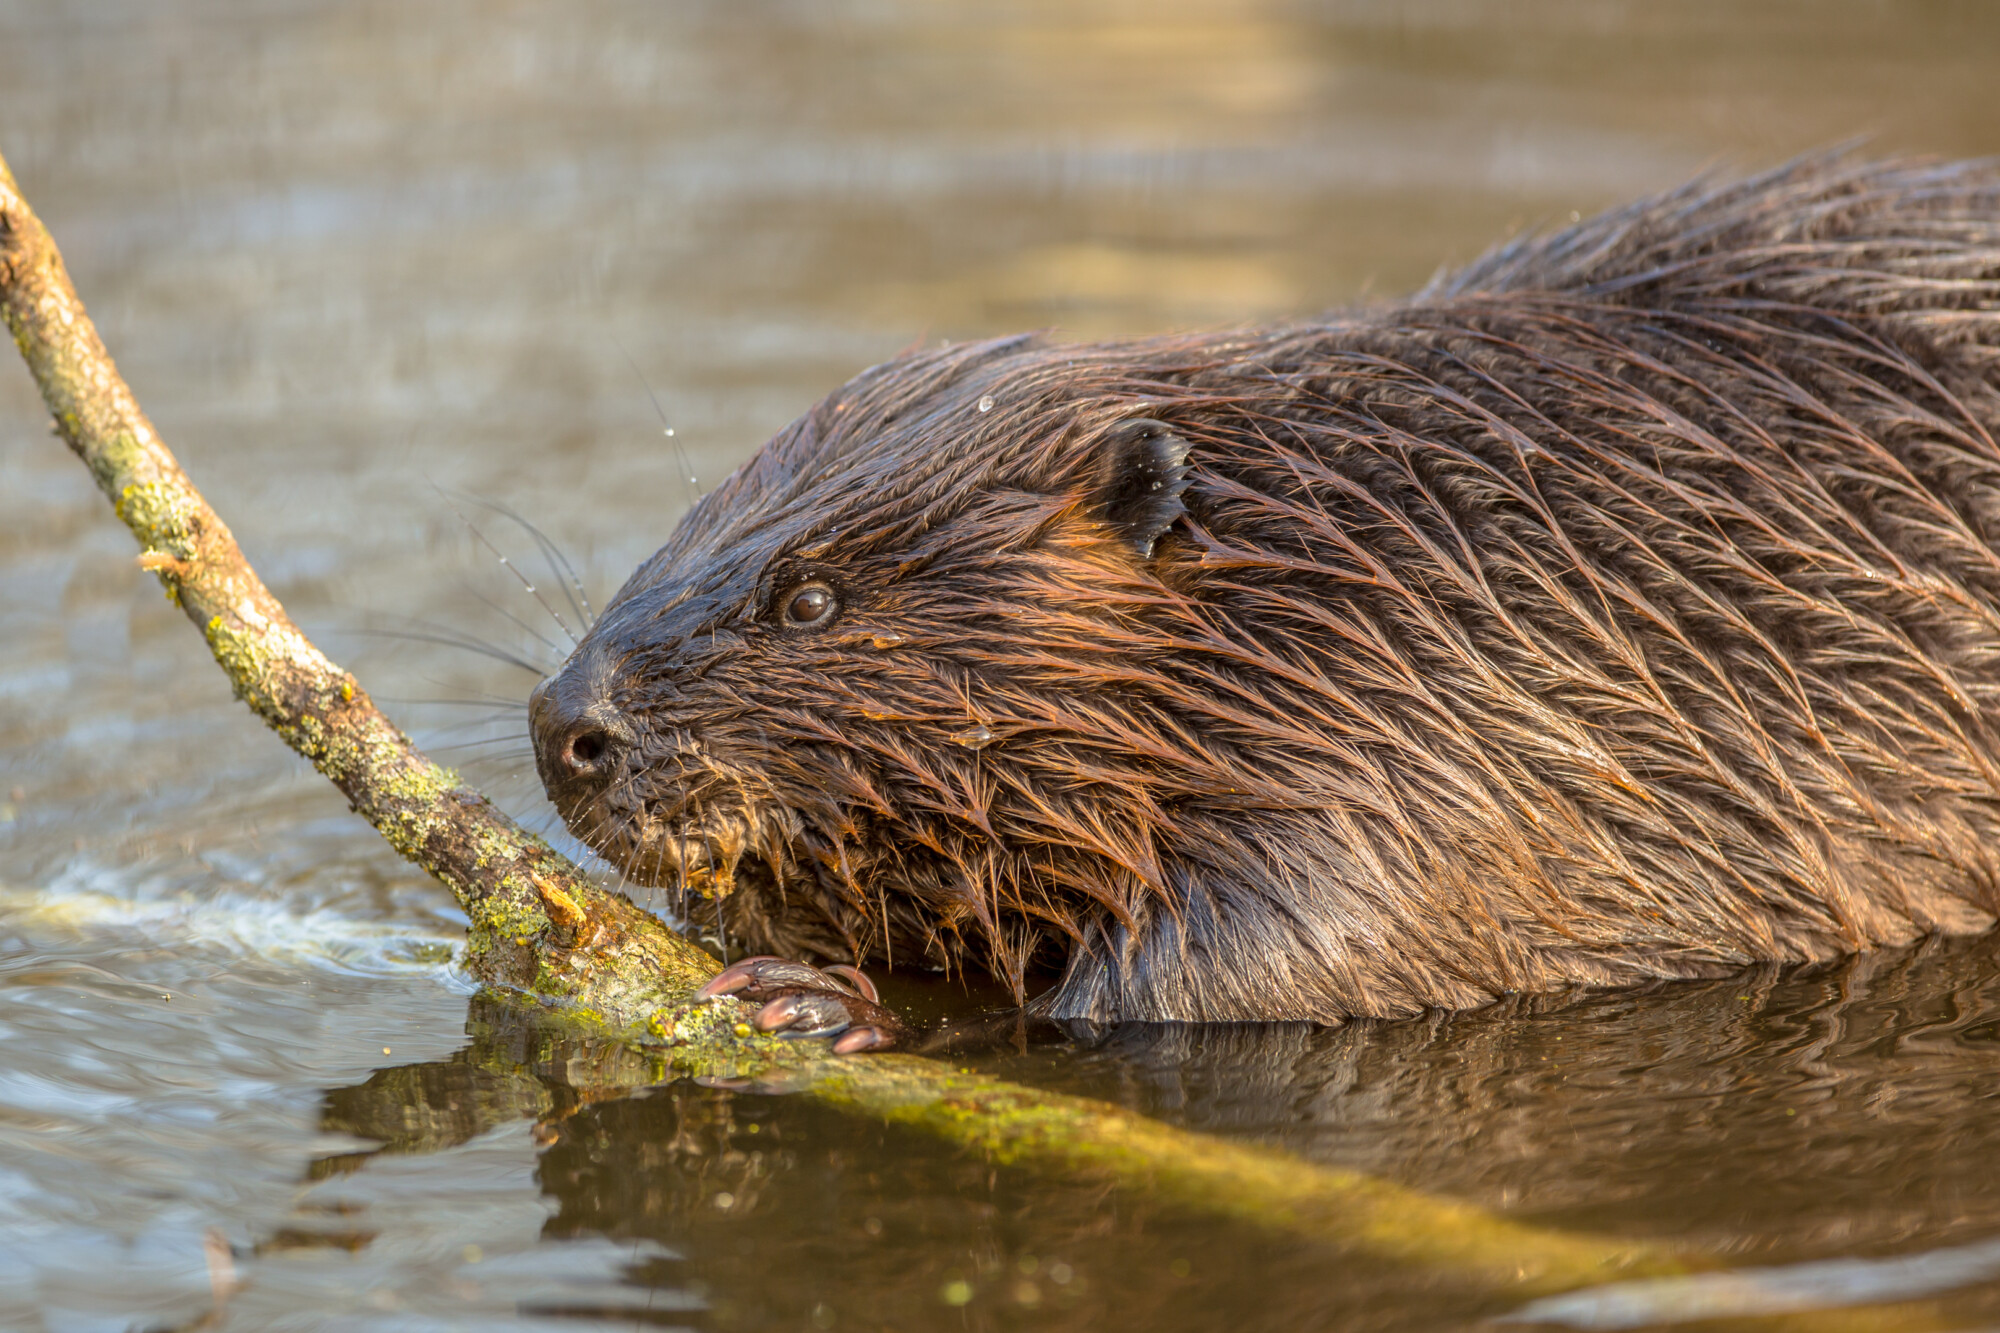 Government plans to release beavers into the wild 